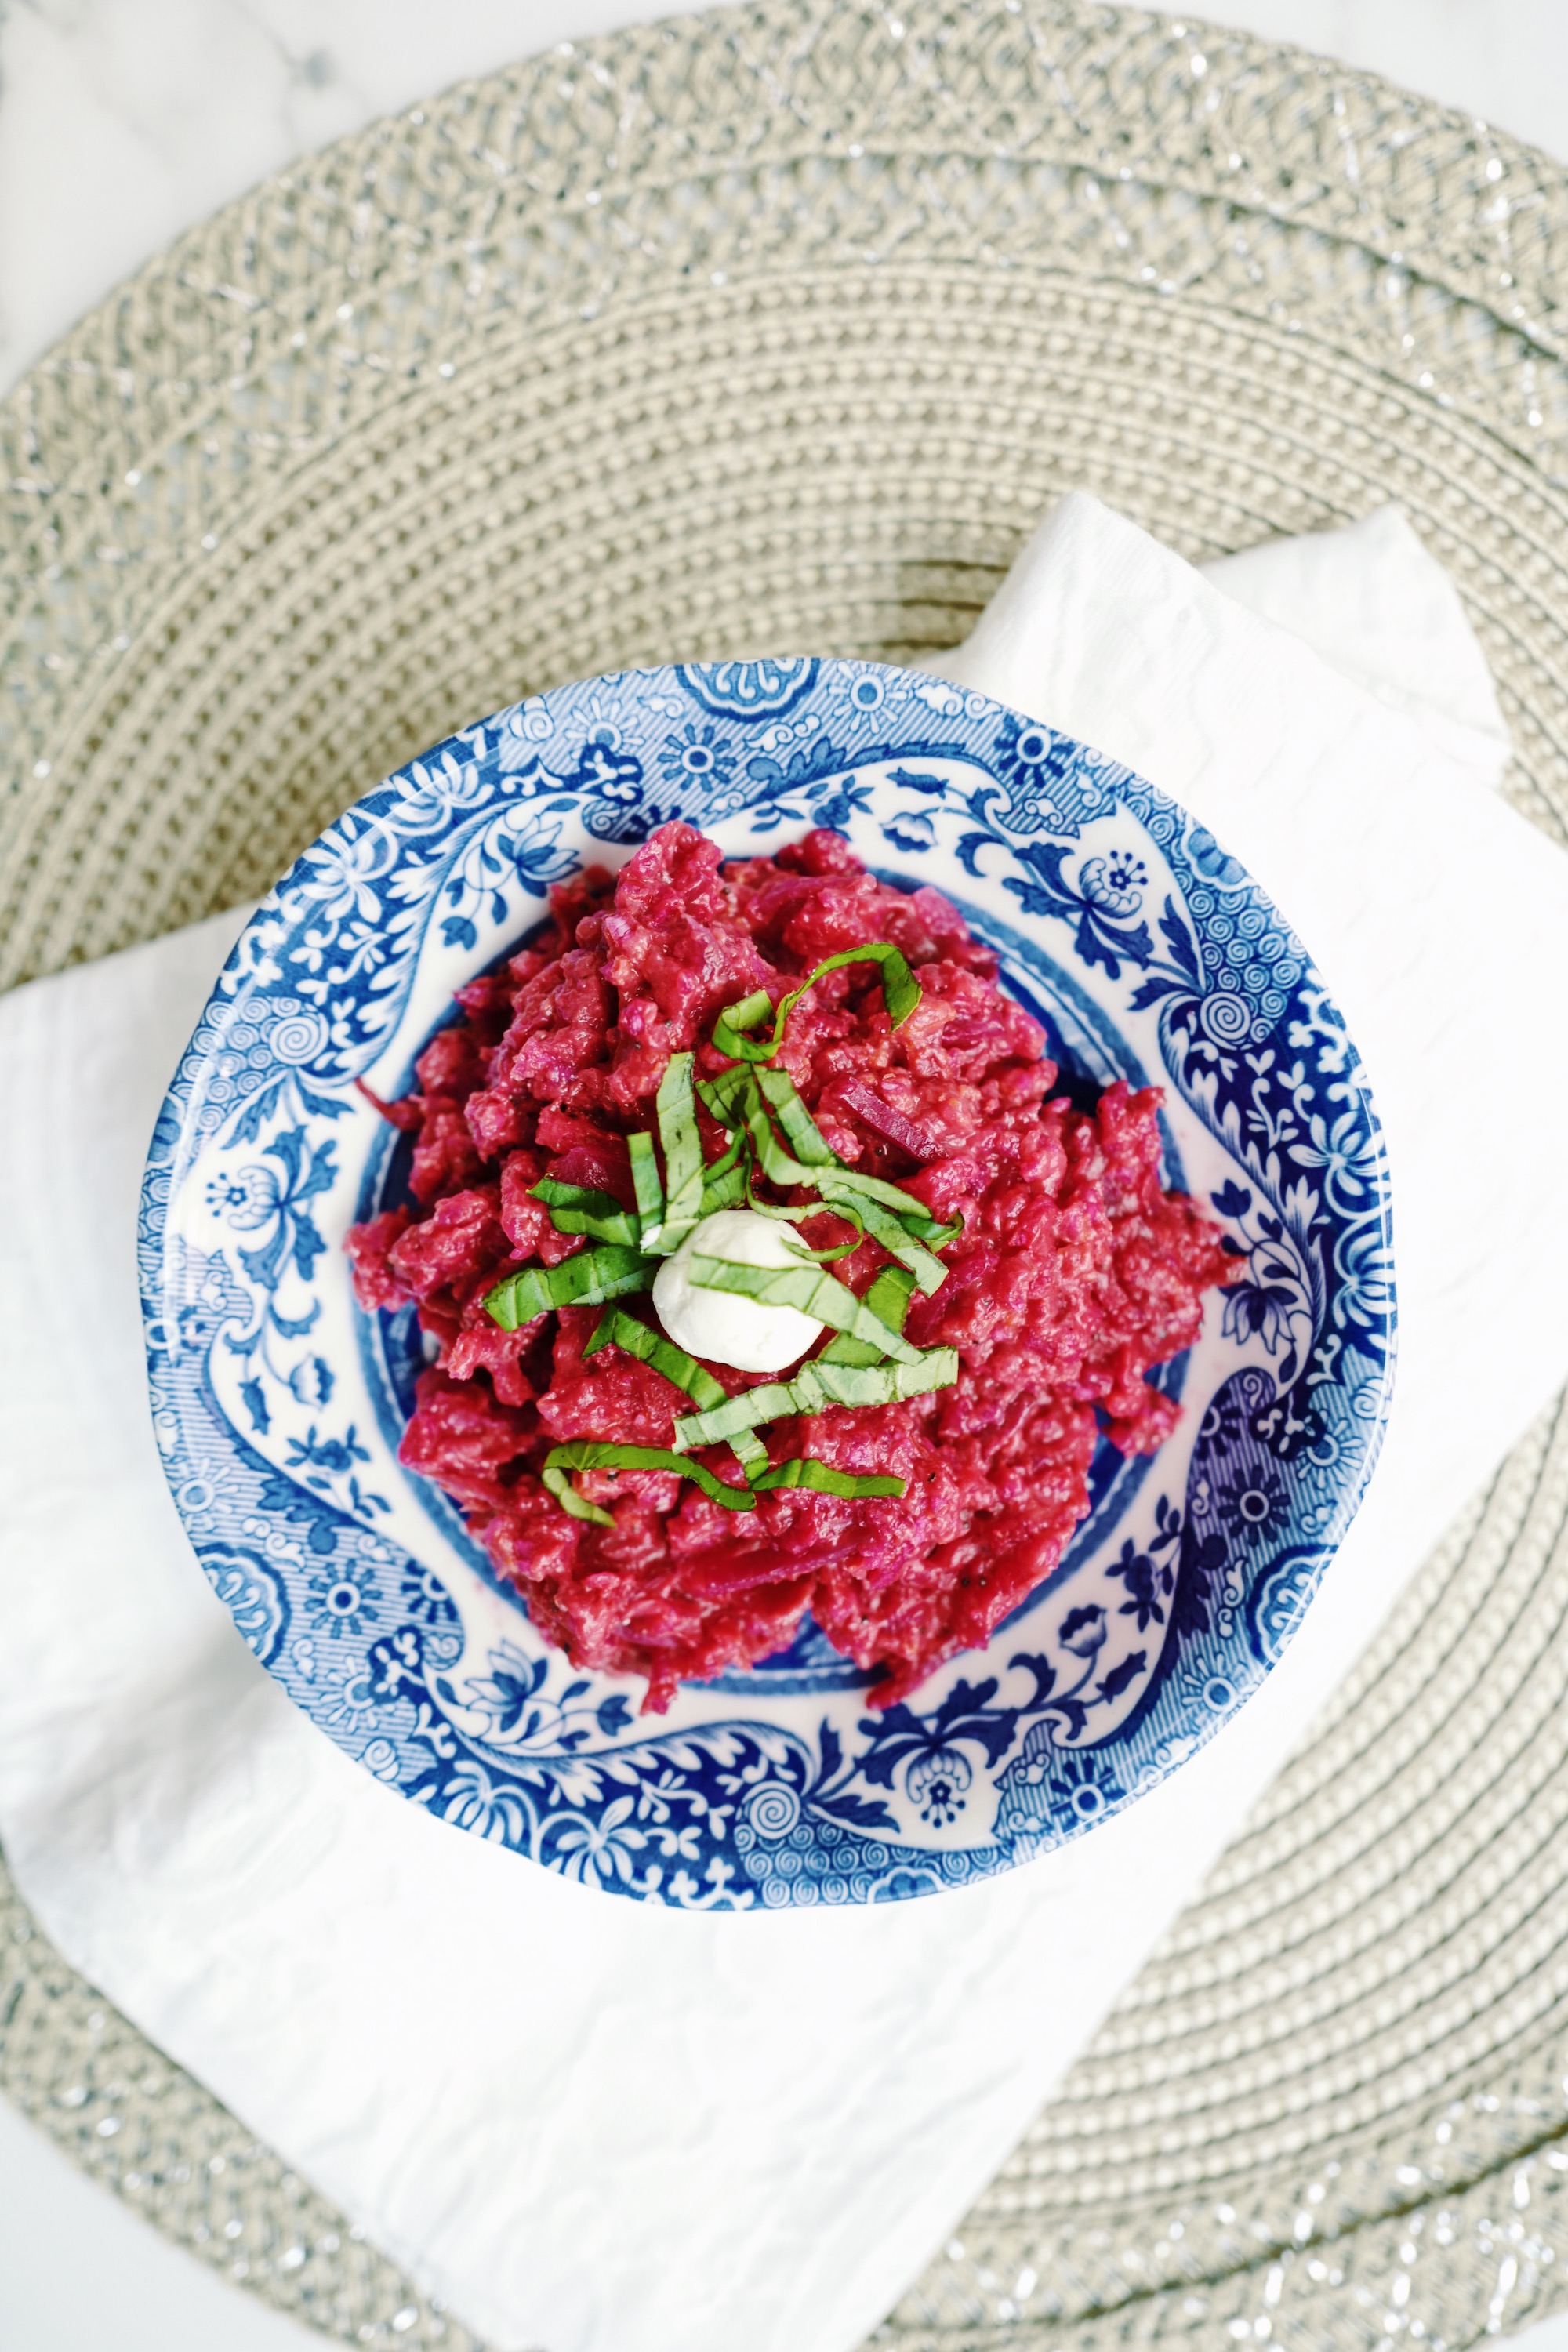 How To Make Risotto with Beets and Rosé